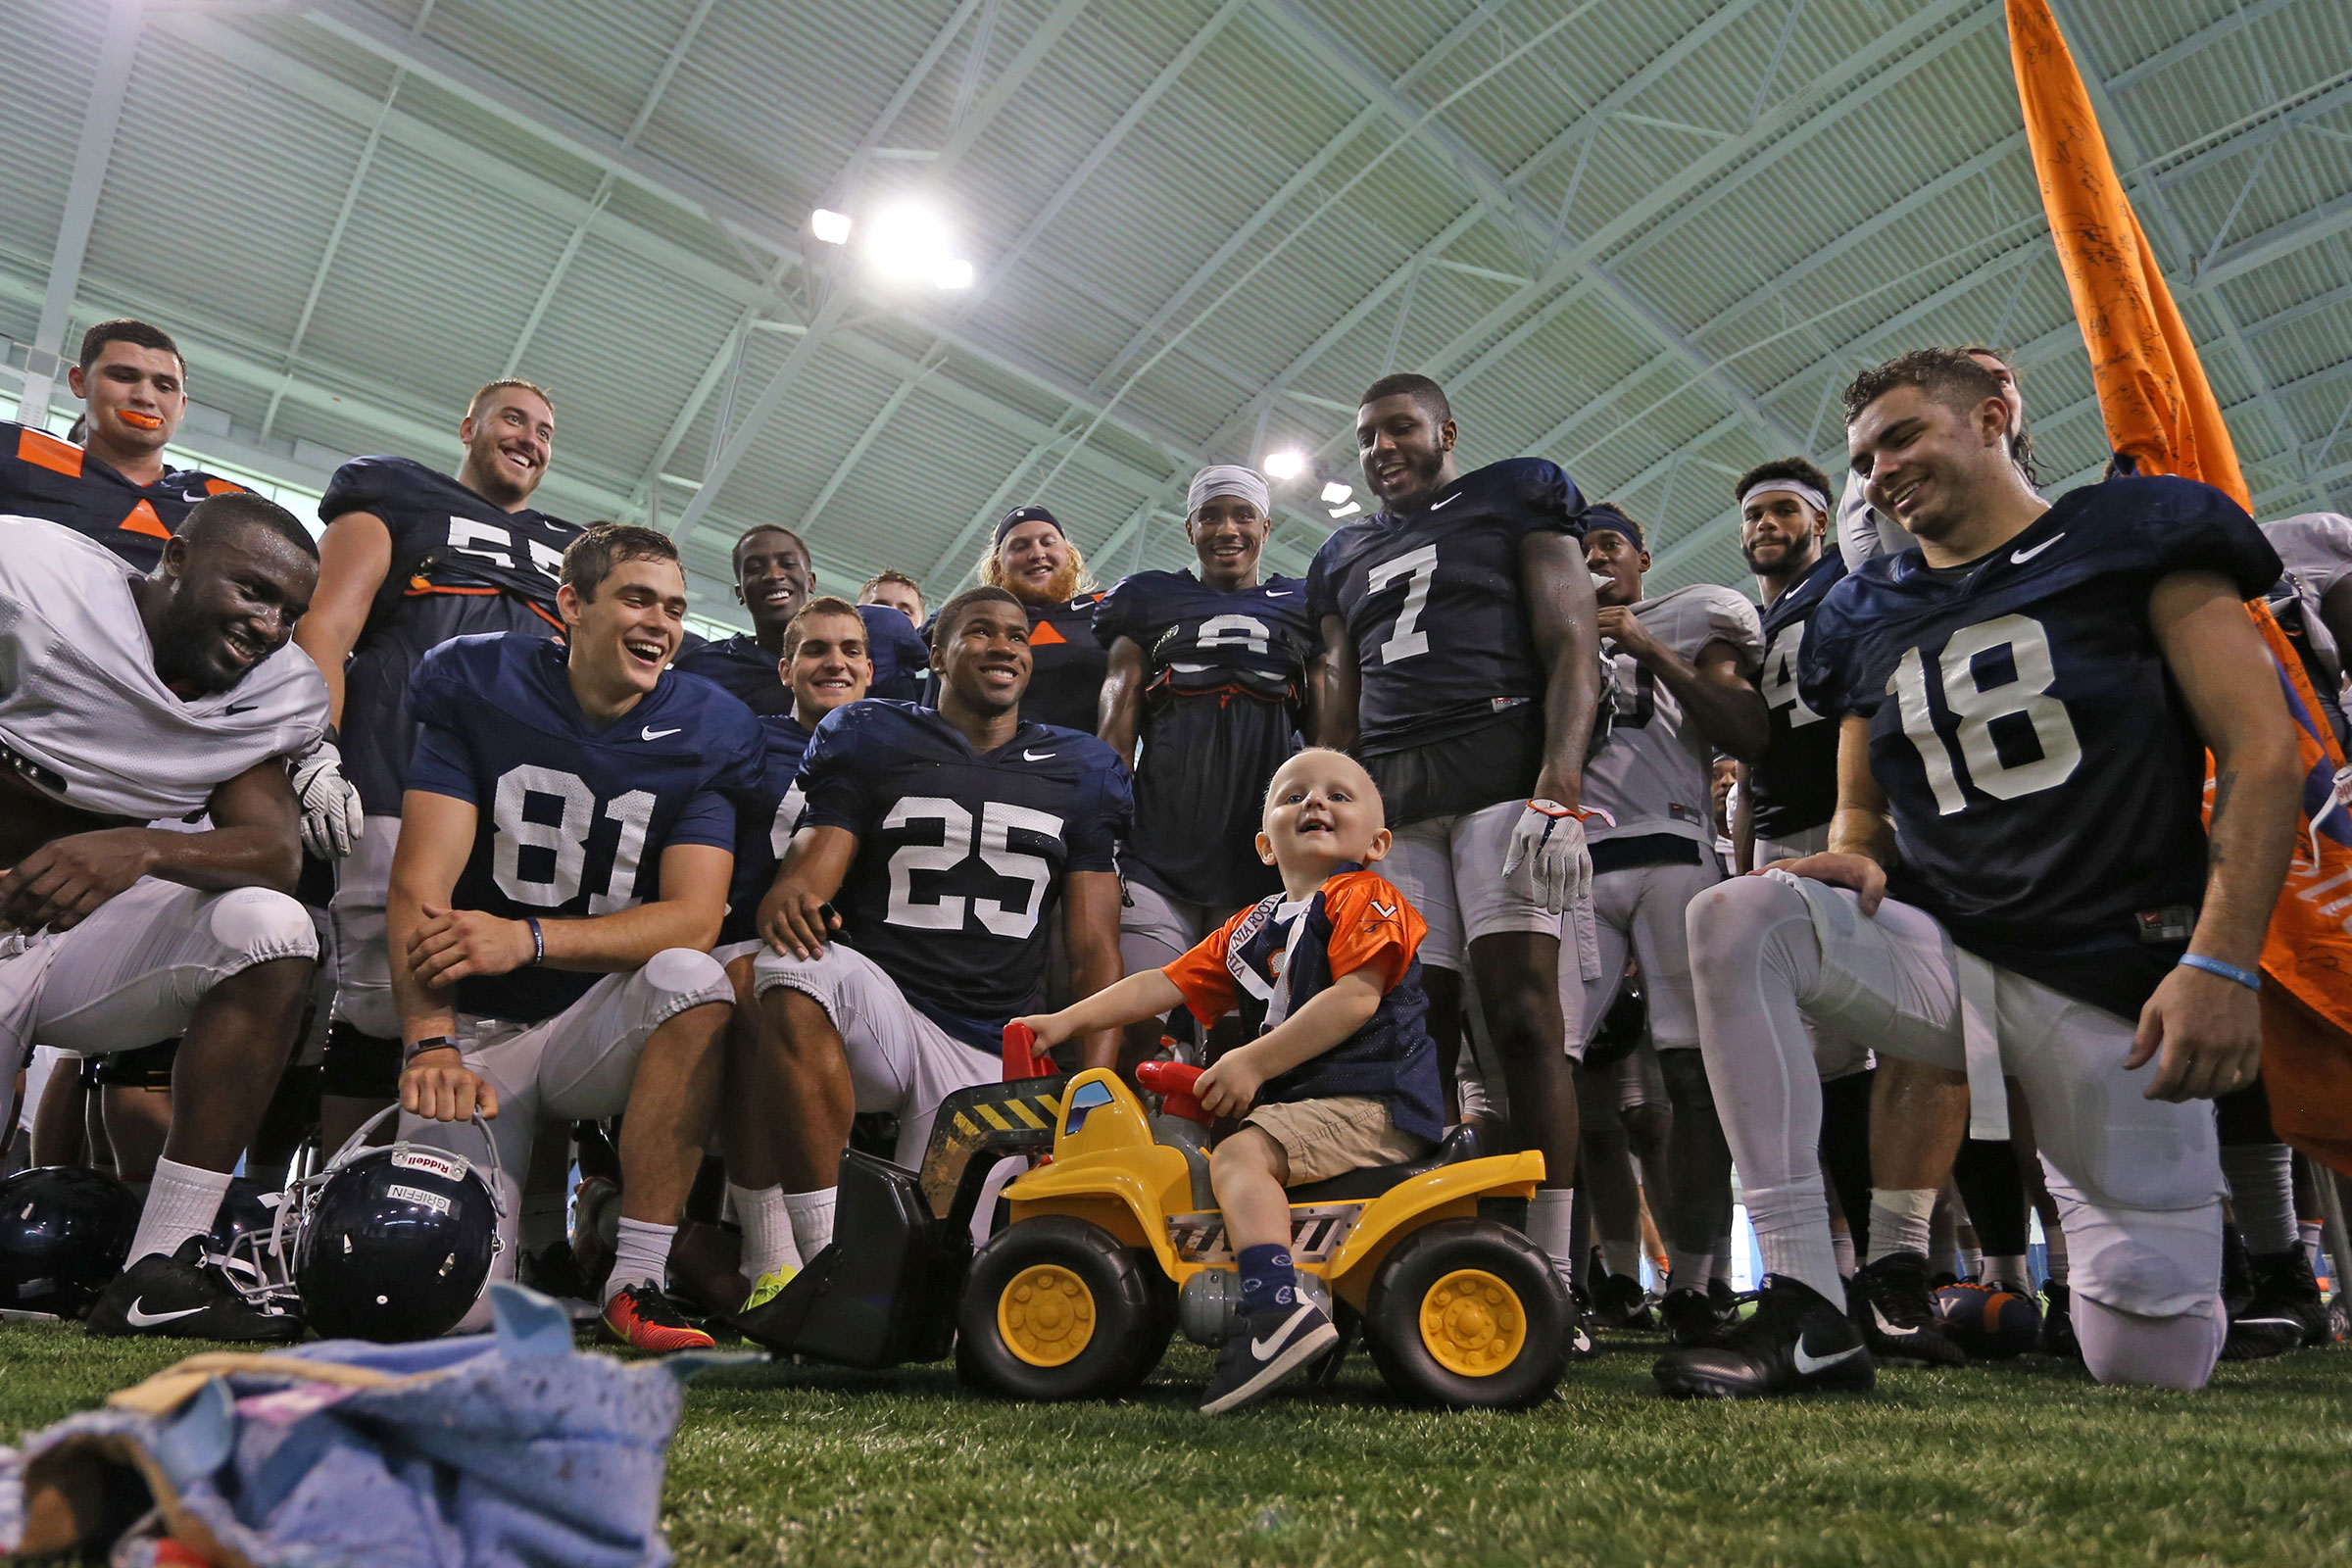 Luke Edwards sits on a little bull dozer while being surrounded by the UVA football team